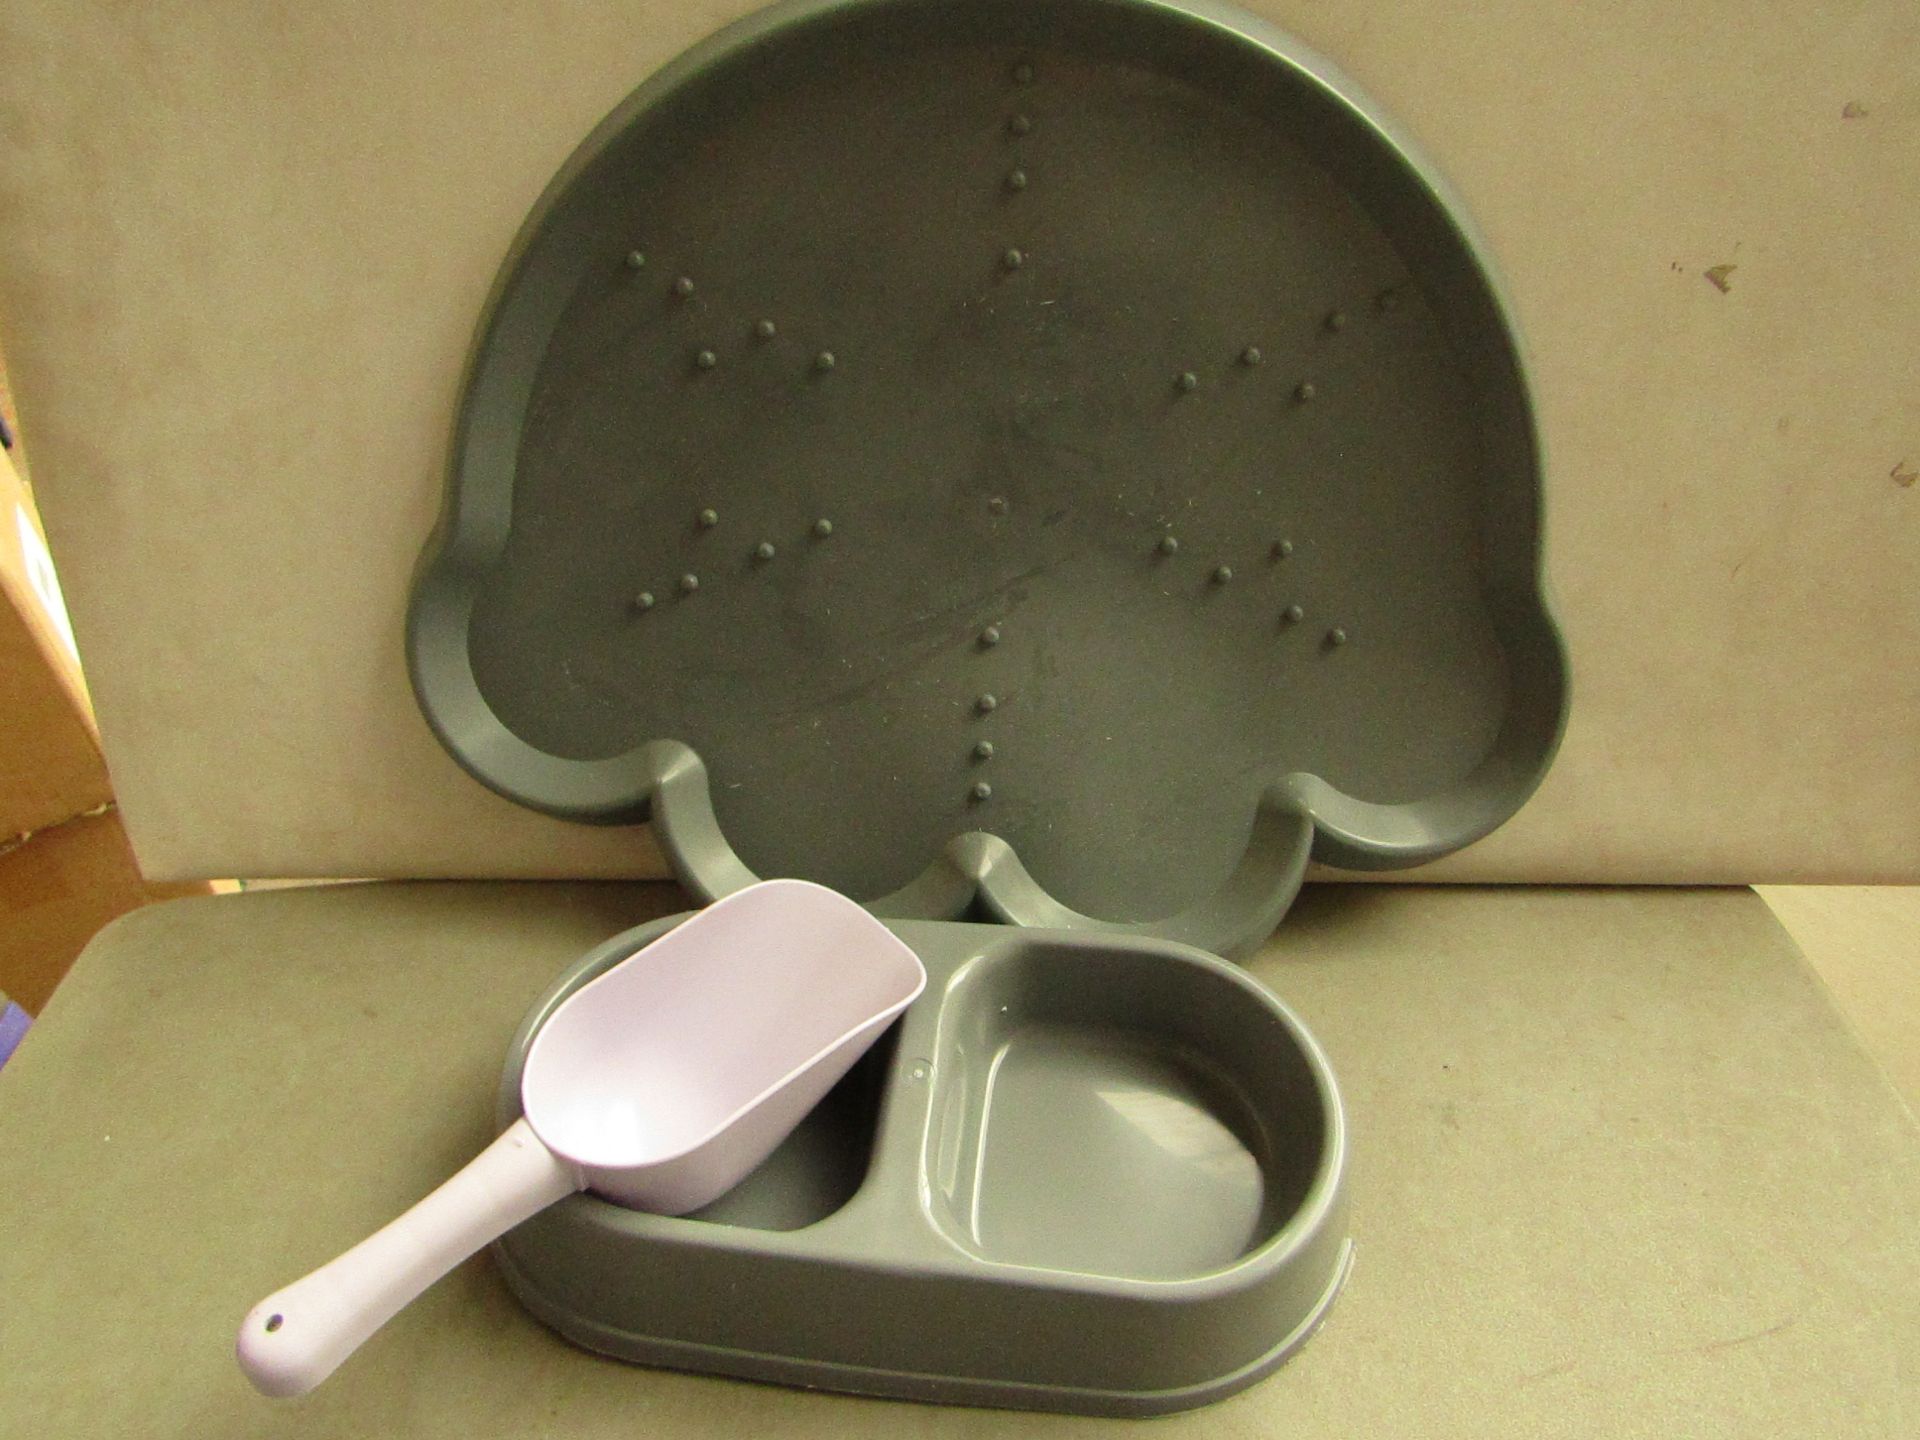 Cat or Dog 3 Piece Set includes a Food Scoop, Double Bowl & a Plastic Mat. Unused & Packaged